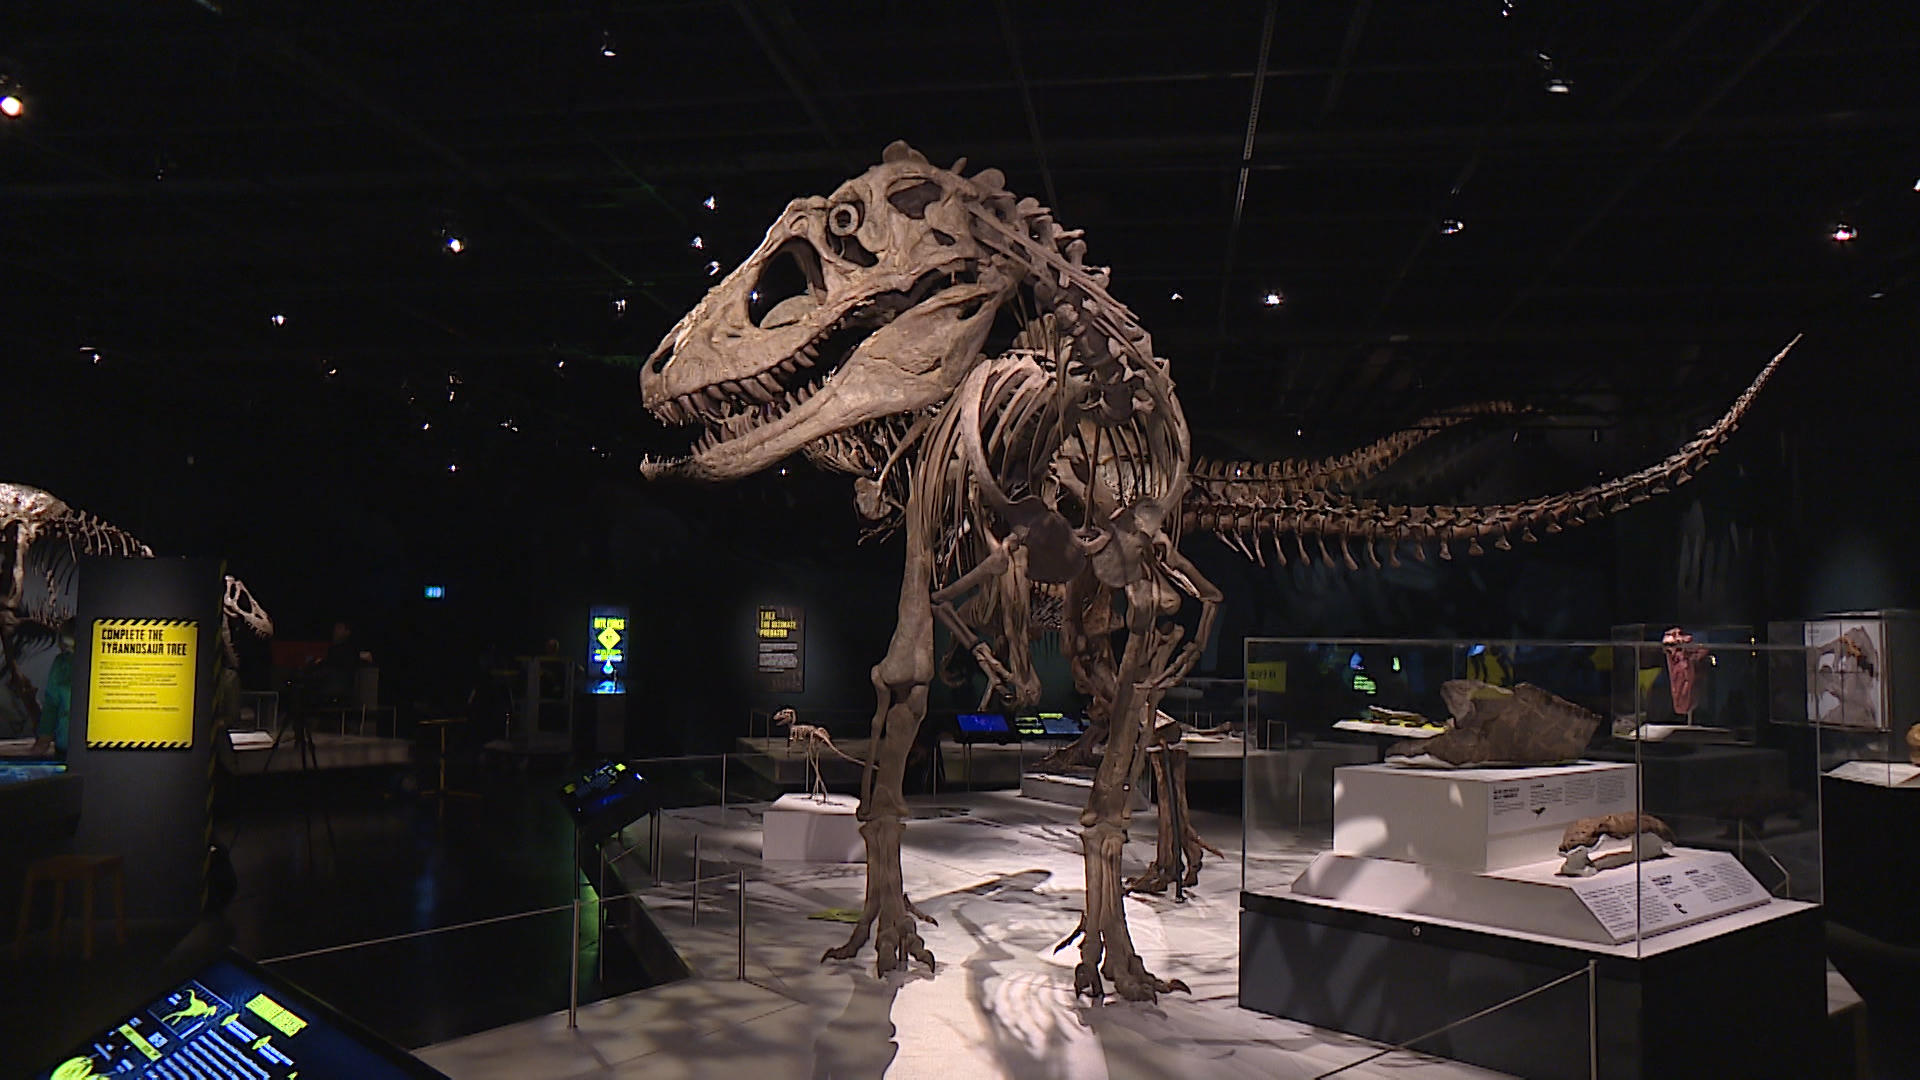 The exhibition will feature one of the largest T-rex skeletons in the world.